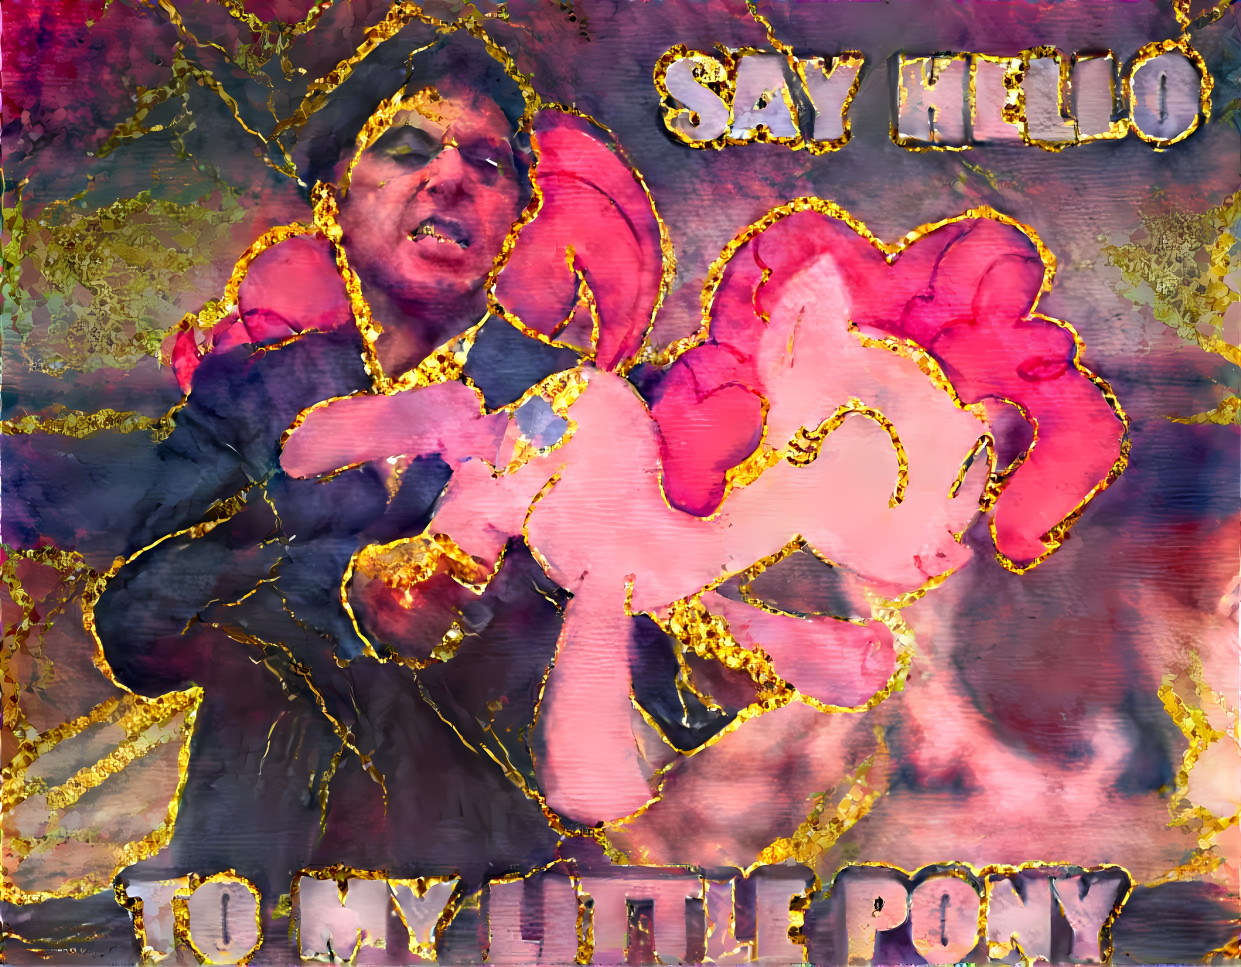 say hellow to my little pony, retextured meme, 2